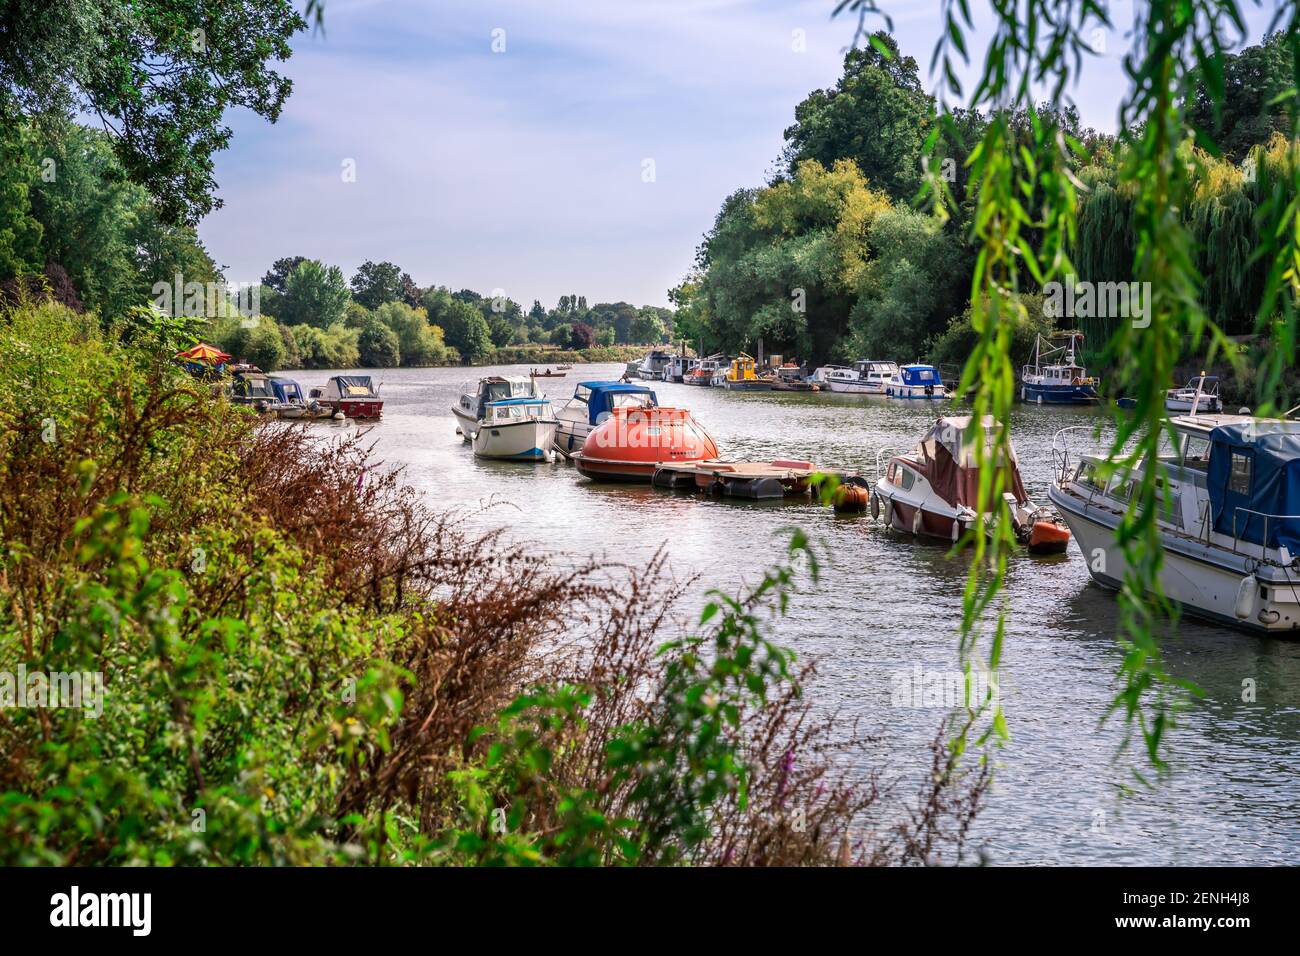 Thames riverfront with many boats in Richmond, London, UK. Stock Photo